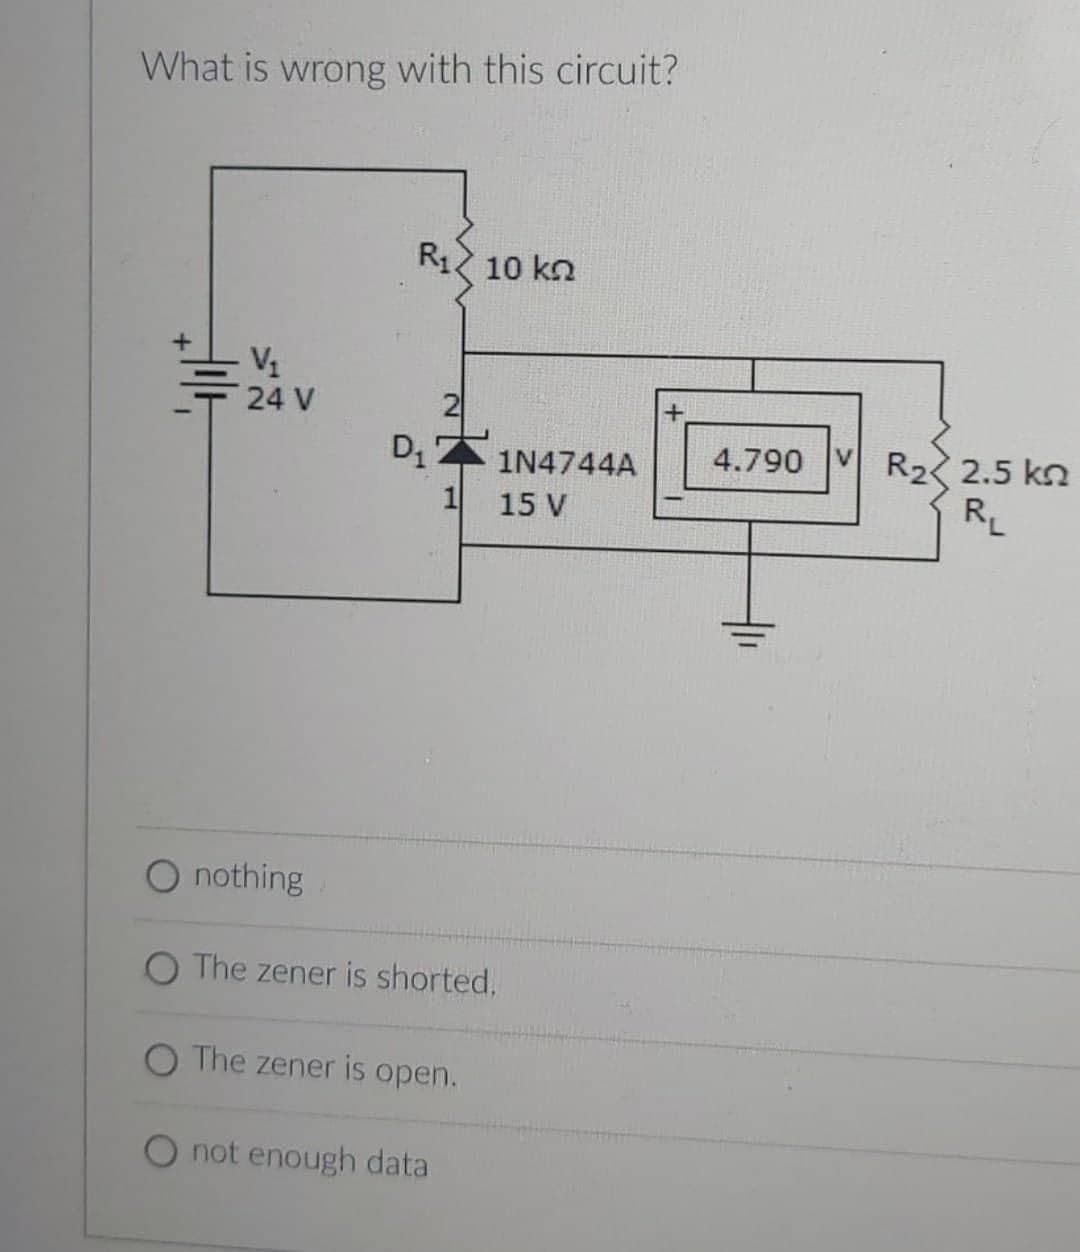 What is wrong with this circuit?
+
T
V₁
24 V
O nothing
R₁ 10 k
D₁
2
1
1N4744A
15 V
The zener is shorted,
O The zener is open.
O not enough data
+
4.790 VR₂2.5 kn
RL